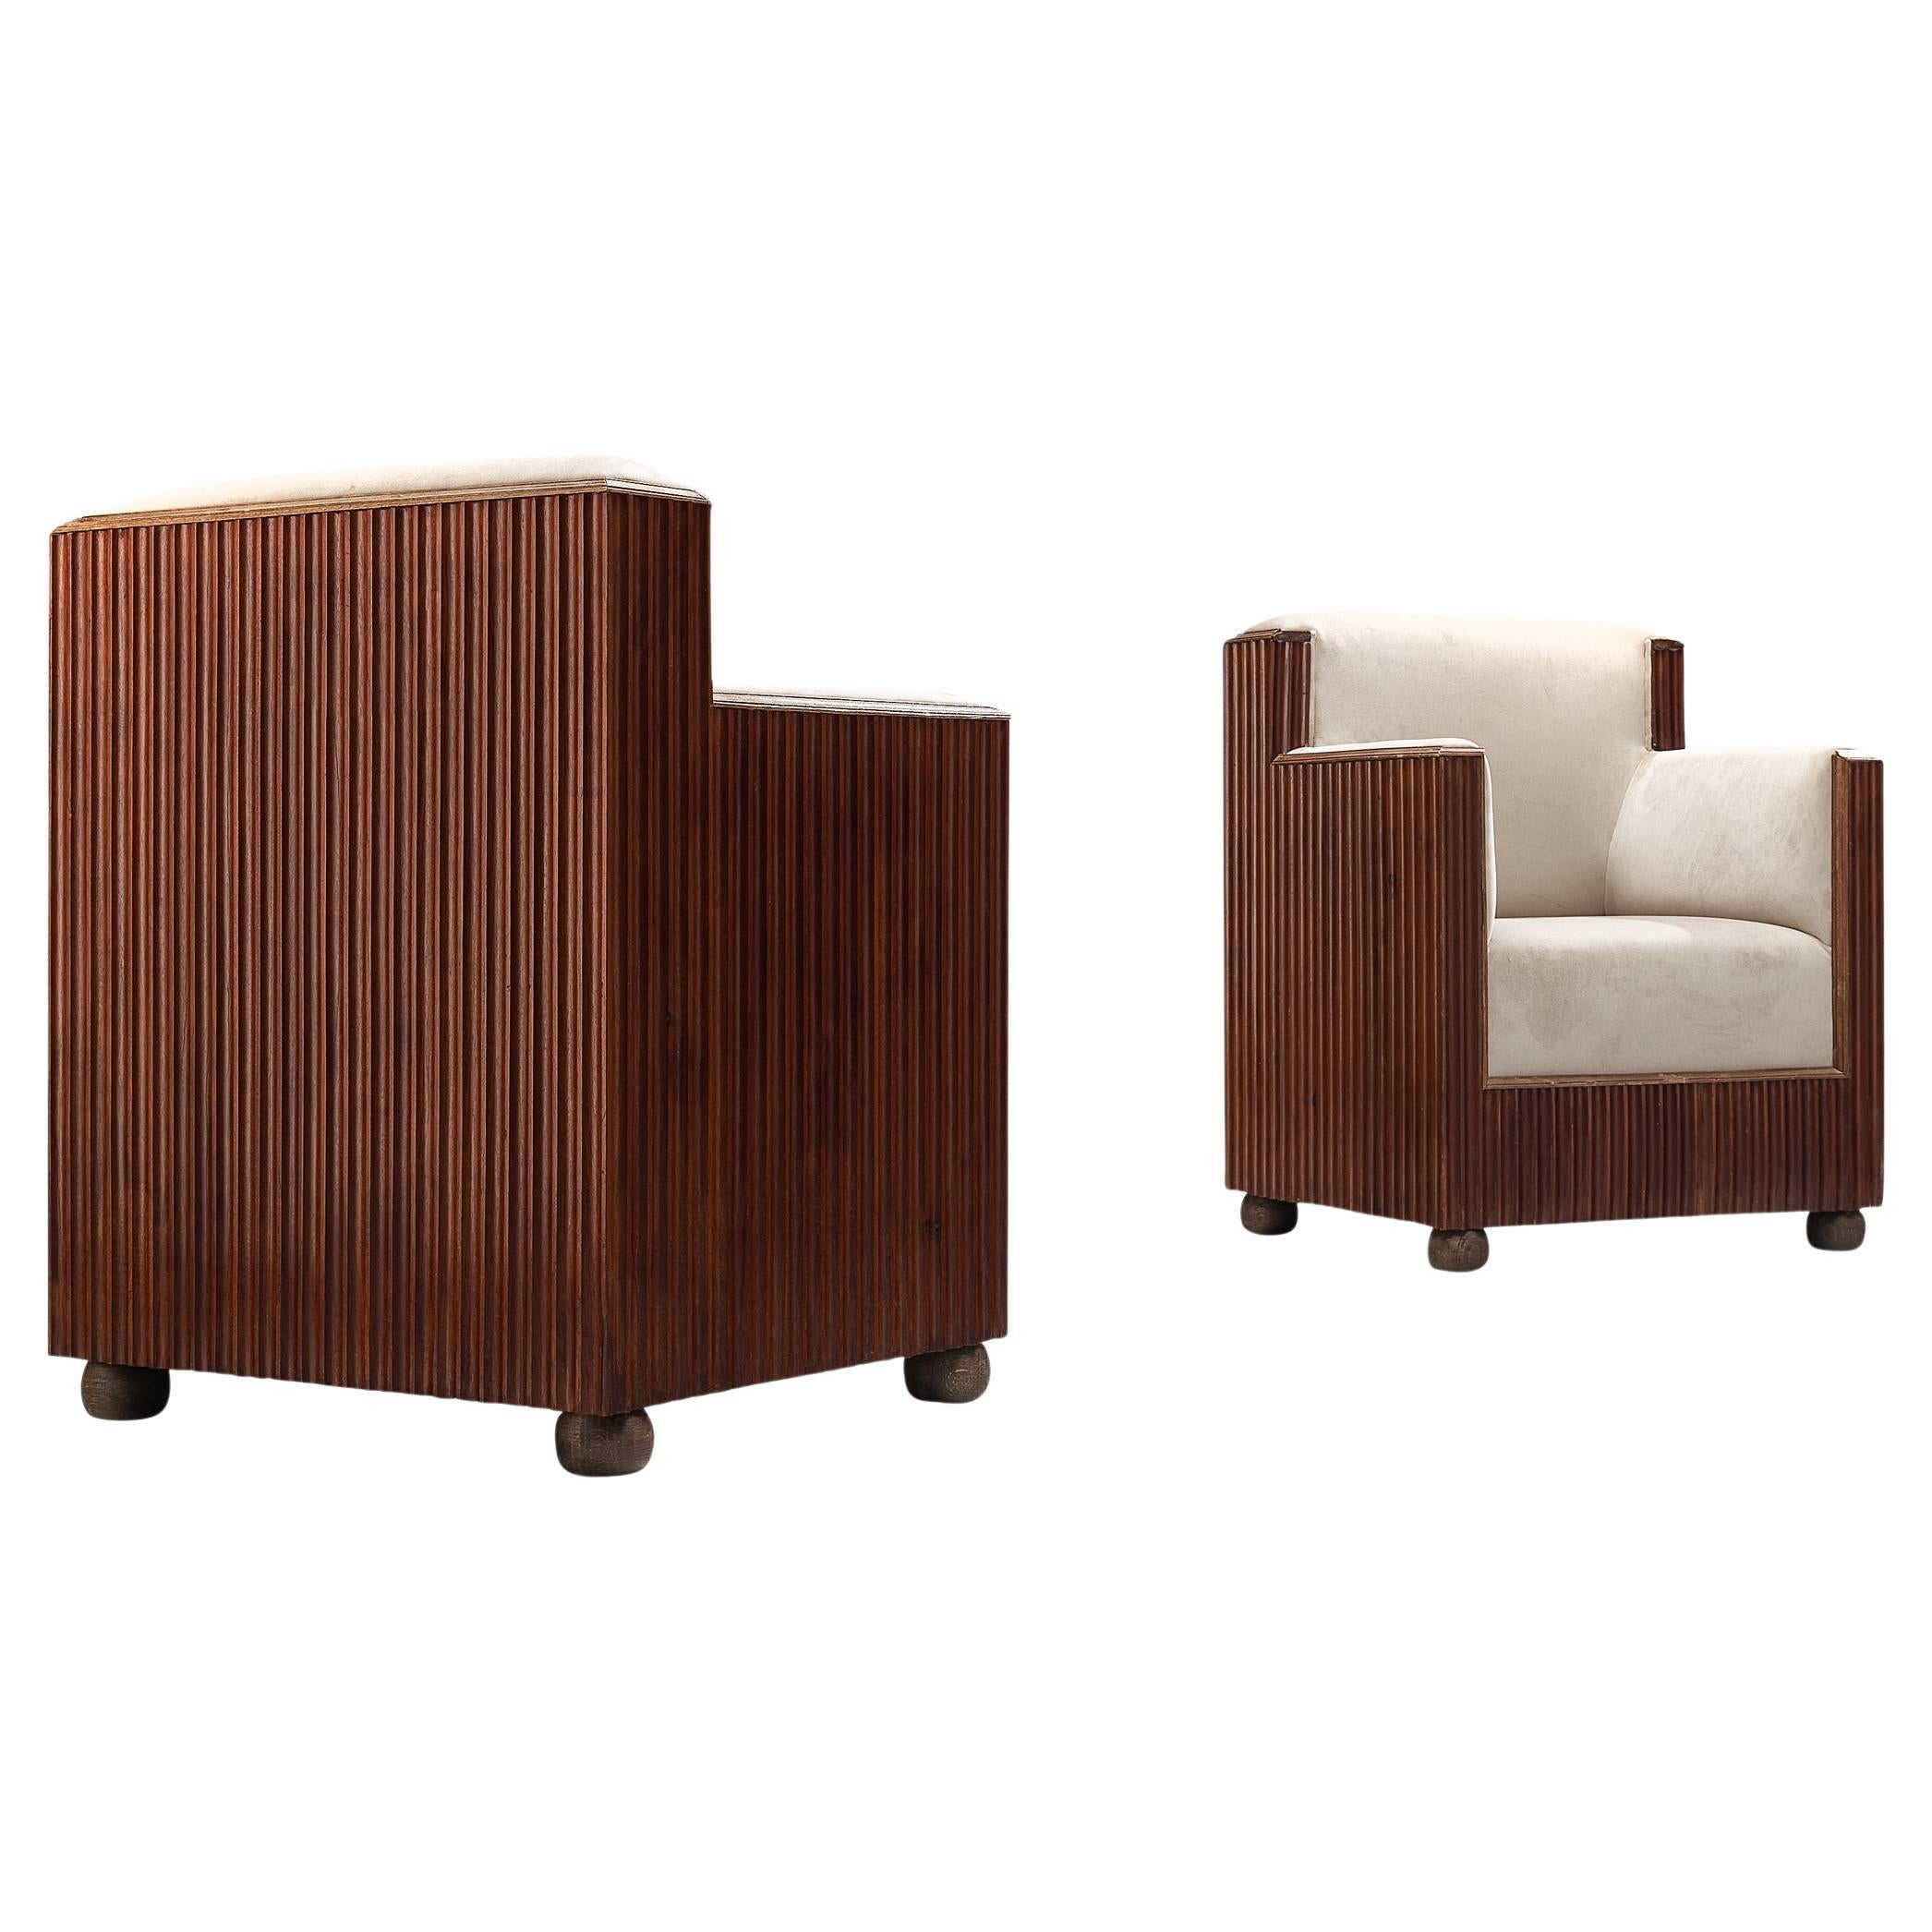 Pair of Art Deco Club Chairs in Mahogany and Off-White Upholstery